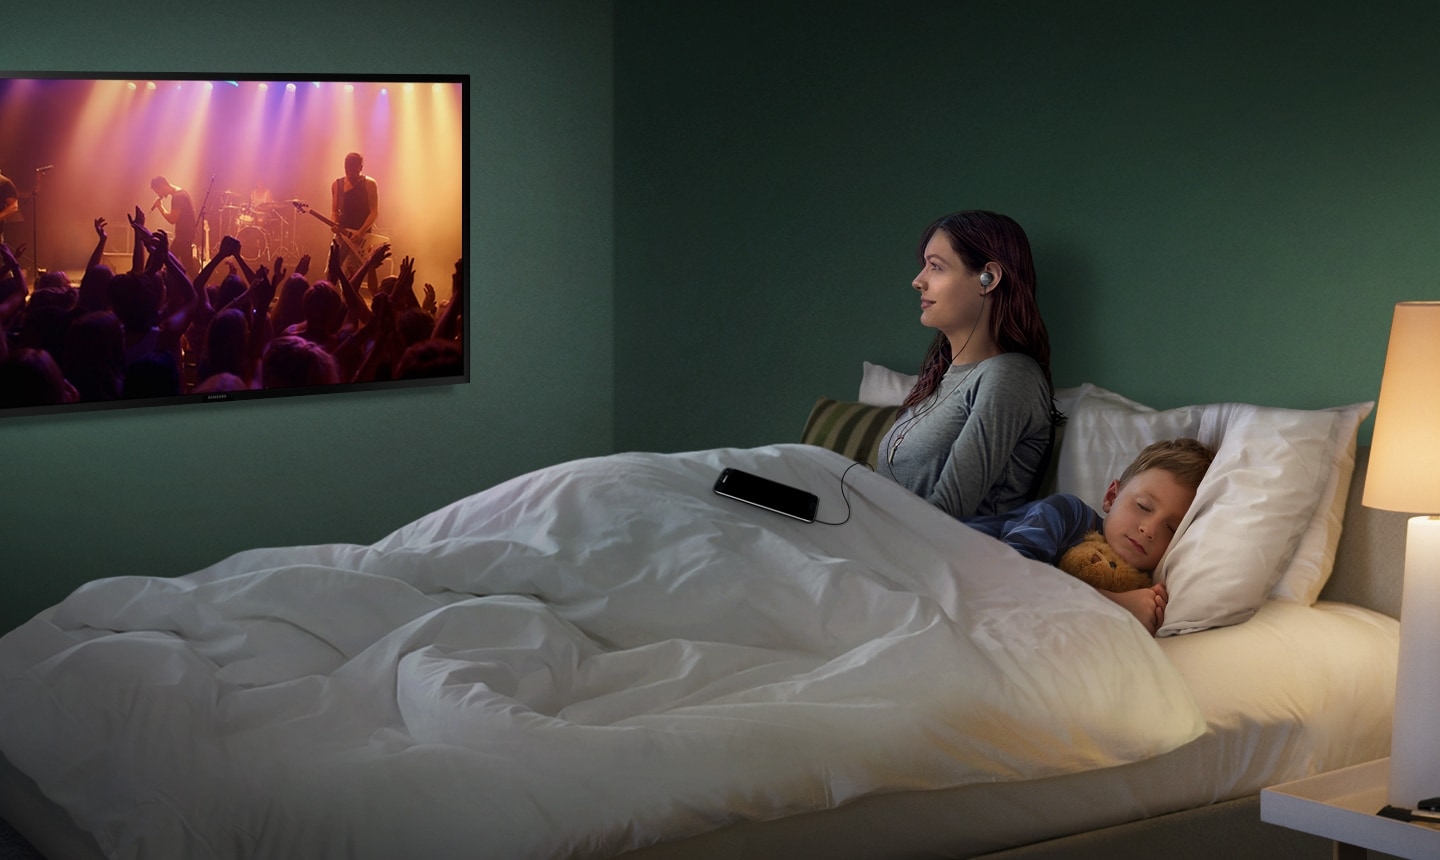 TV sound to mobile feature in latest Samsung 32 inch Full hd TVs